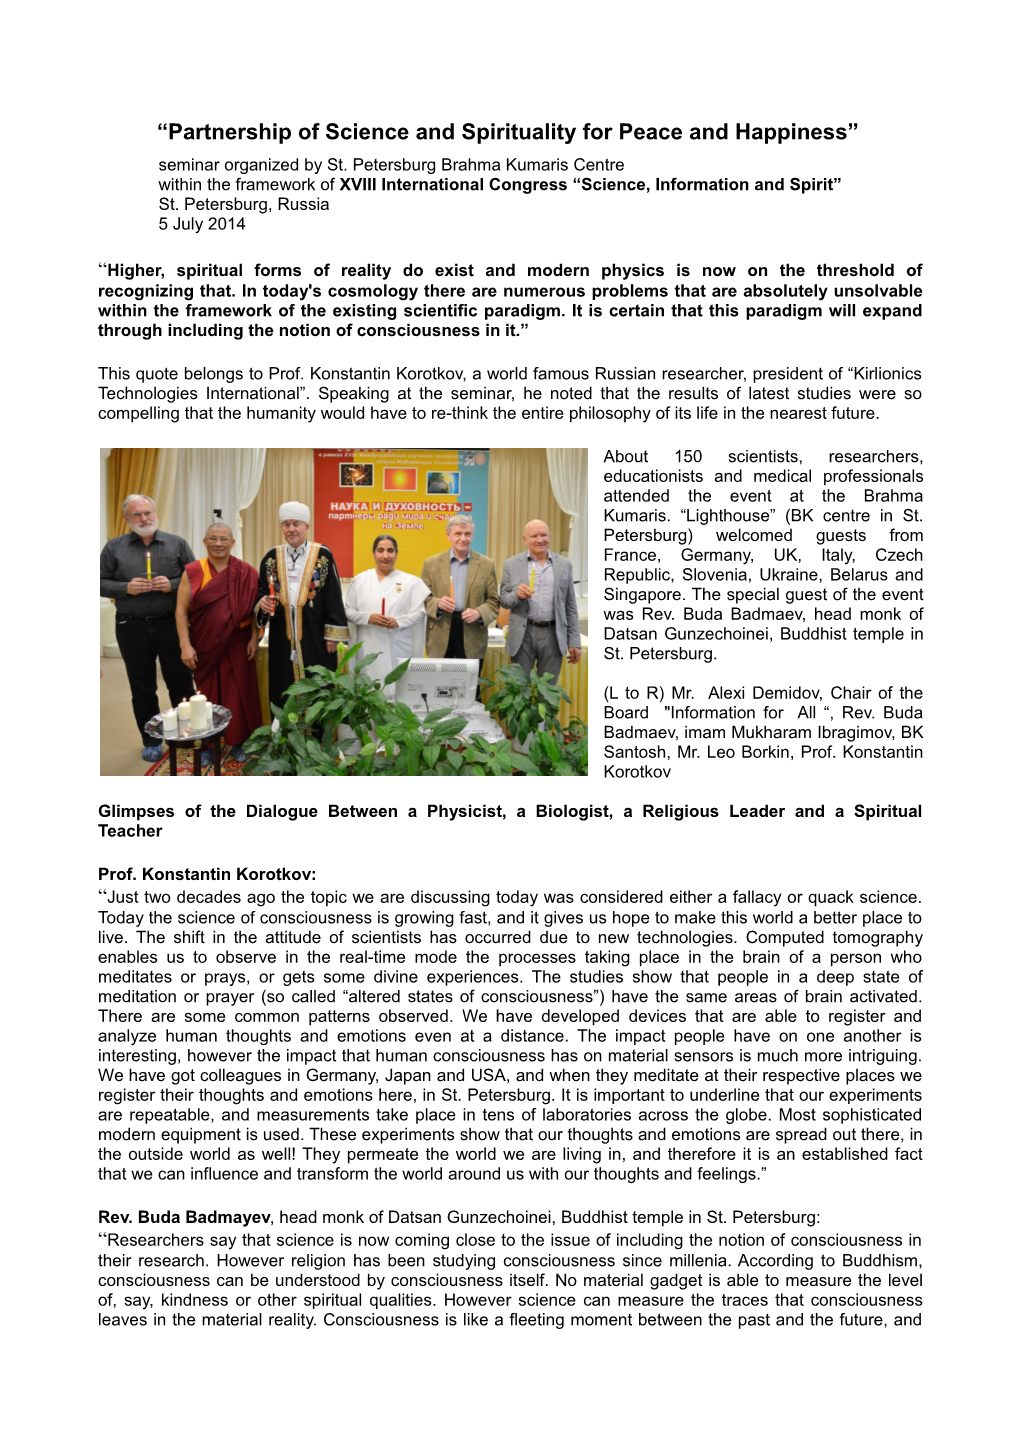 “Partnership of Science and Spirituality for Peace and Happiness” Seminar Organized by St